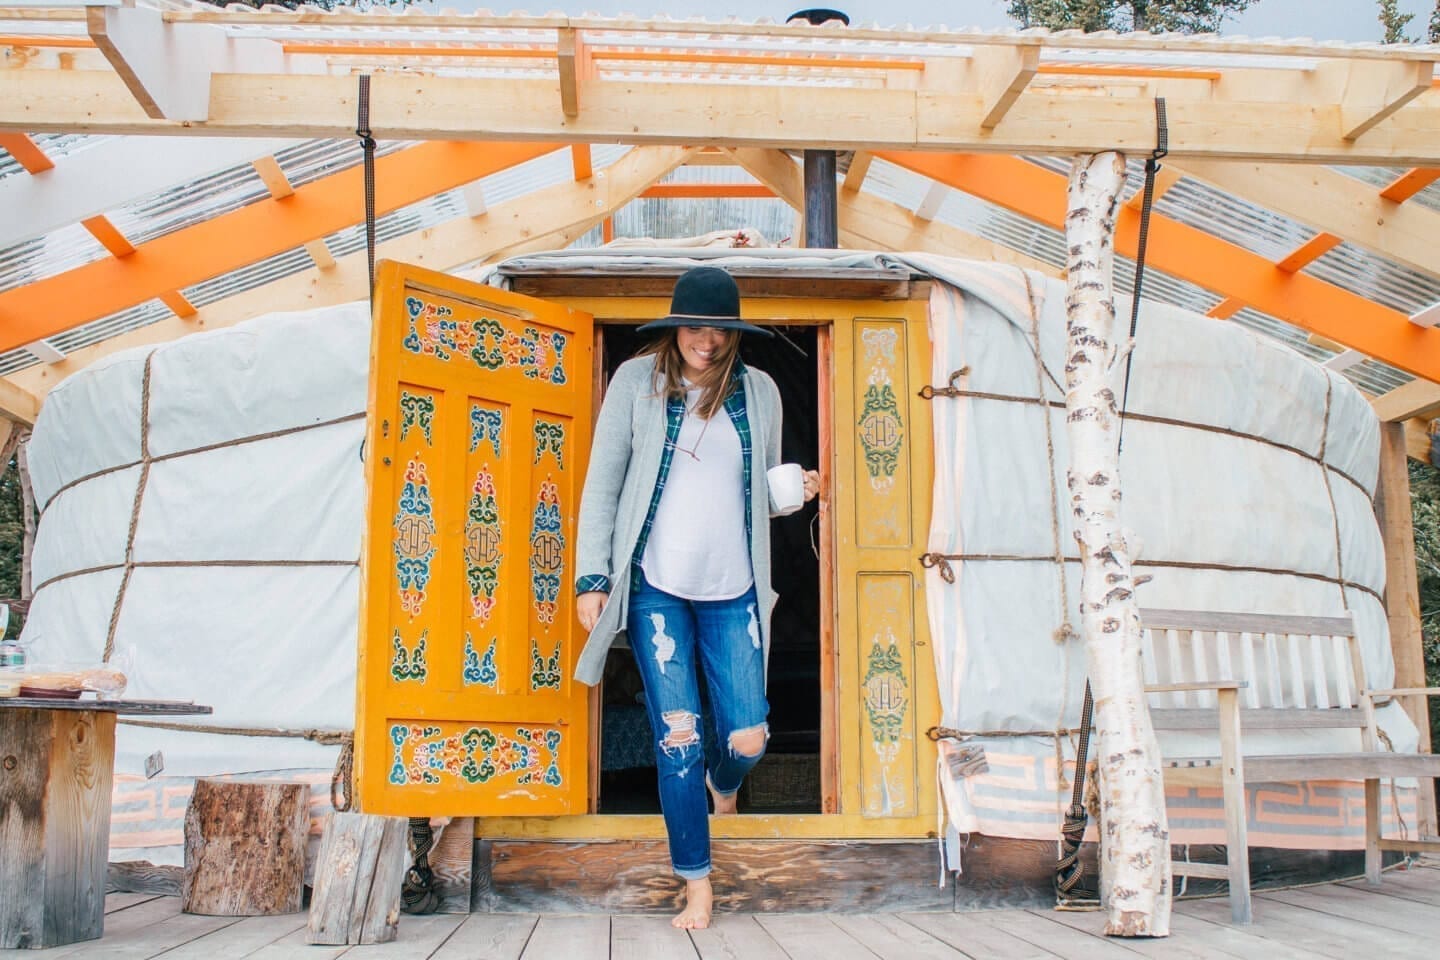 A Long Weekend Guide to Whitehorse, Yukon & Where You Can Stay in a Yurt